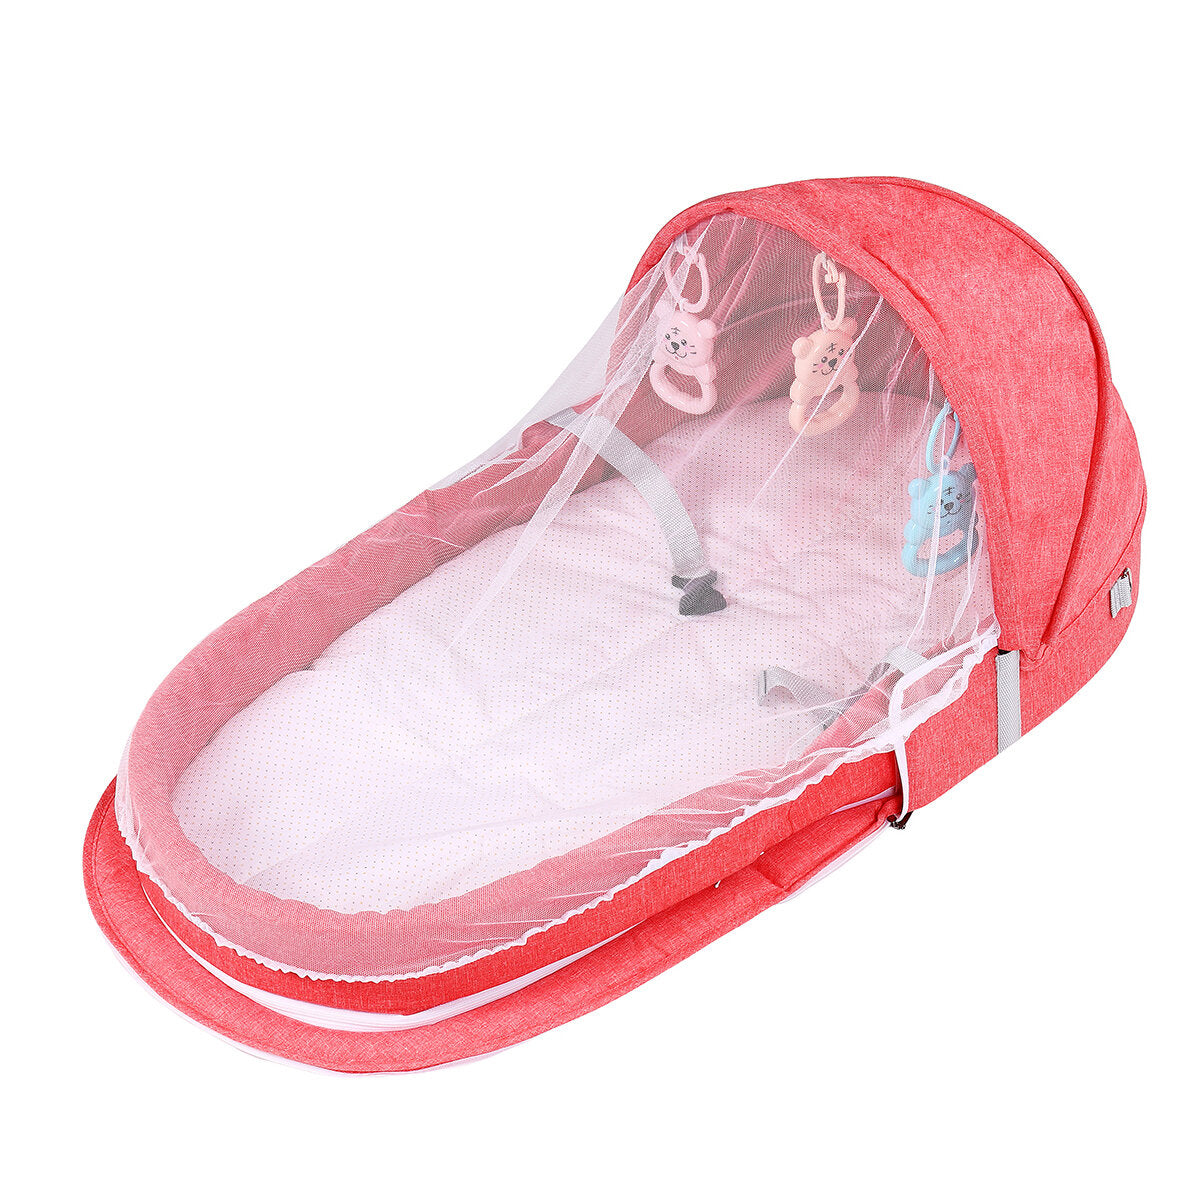 2-in-1 Folding Baby Sleeping Bed Lounger Travel Infant Bed with Mosquito Net